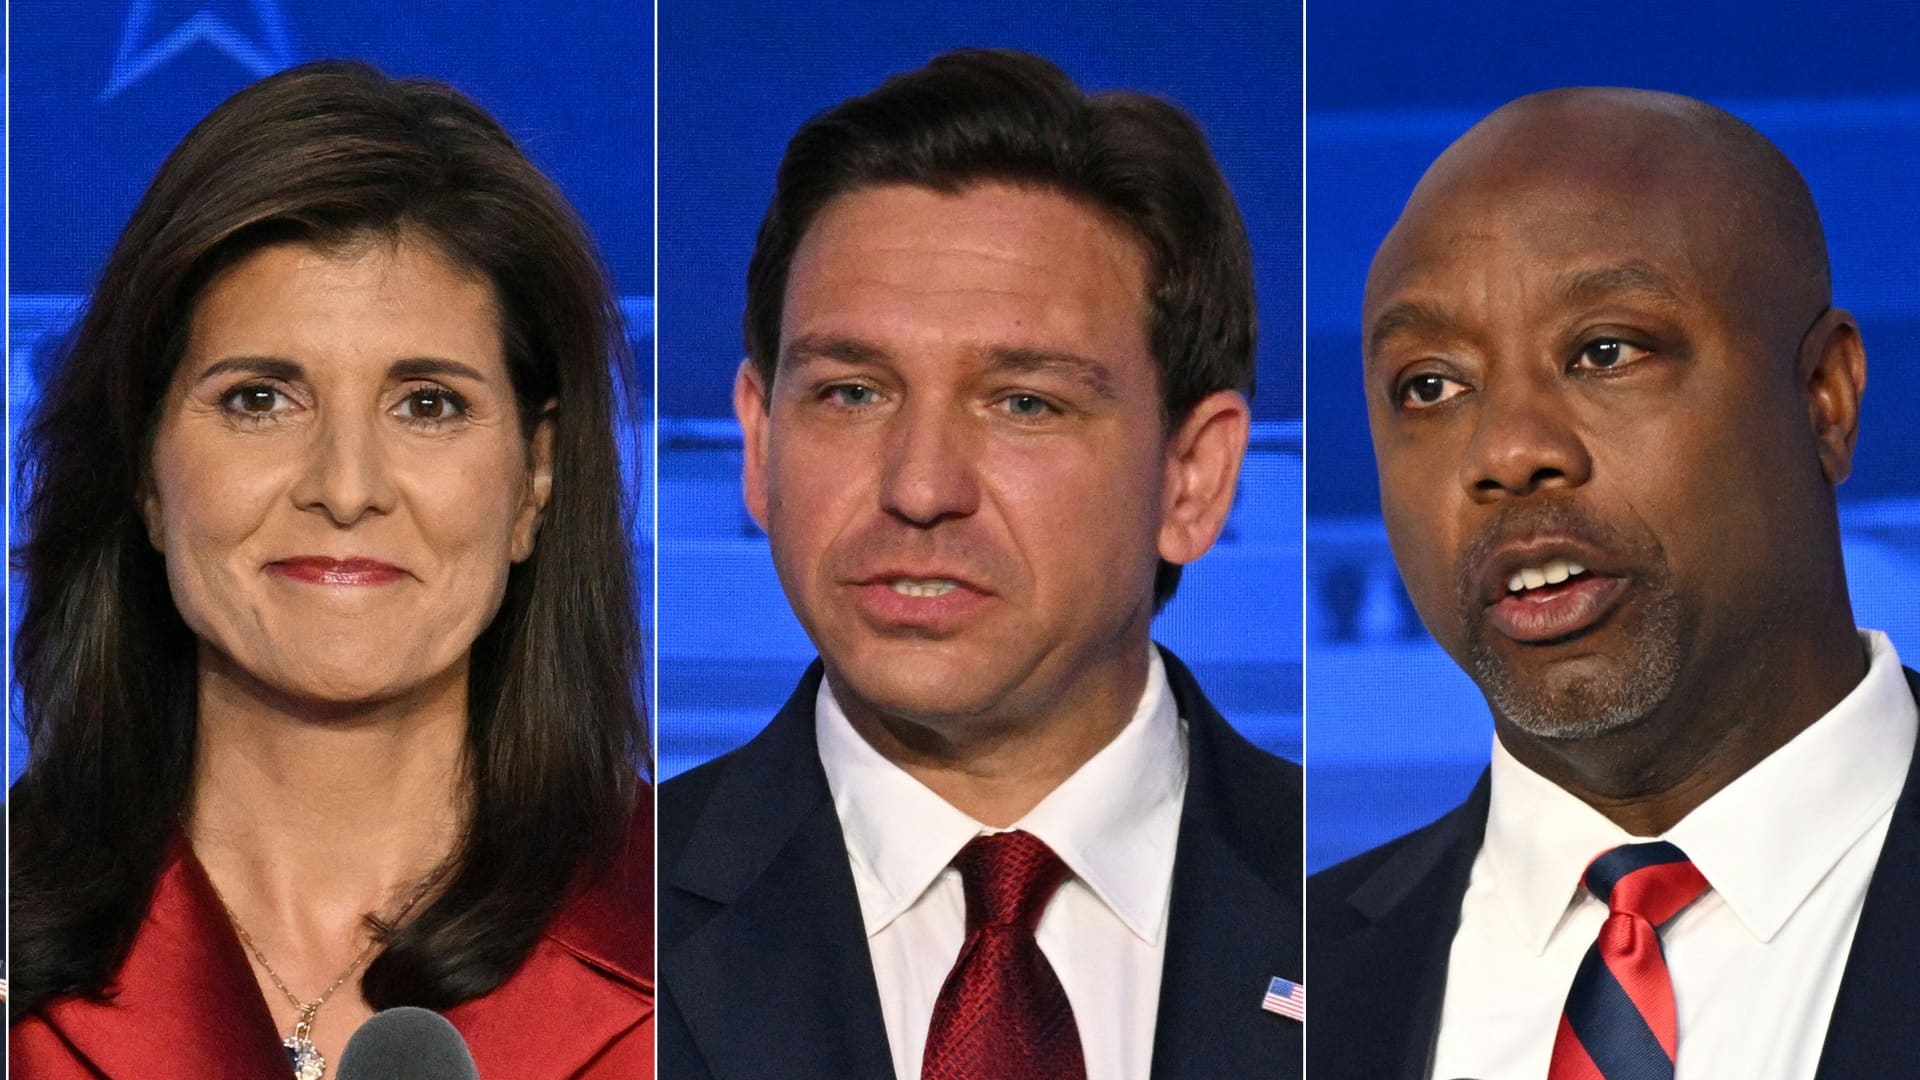 The Republican National Committee announced November 6, 2023 that five presidential candidates have met the criteria to participate in Wednesday's third primary debate in Miami. They are former New Jersey Governor Chris Christie, Florida Governor Ron DeSantis, former South Carolina Governor Nikki Haley, entrepreneur Vivek Ramaswamy and South Carolina Senator Tim Scott.